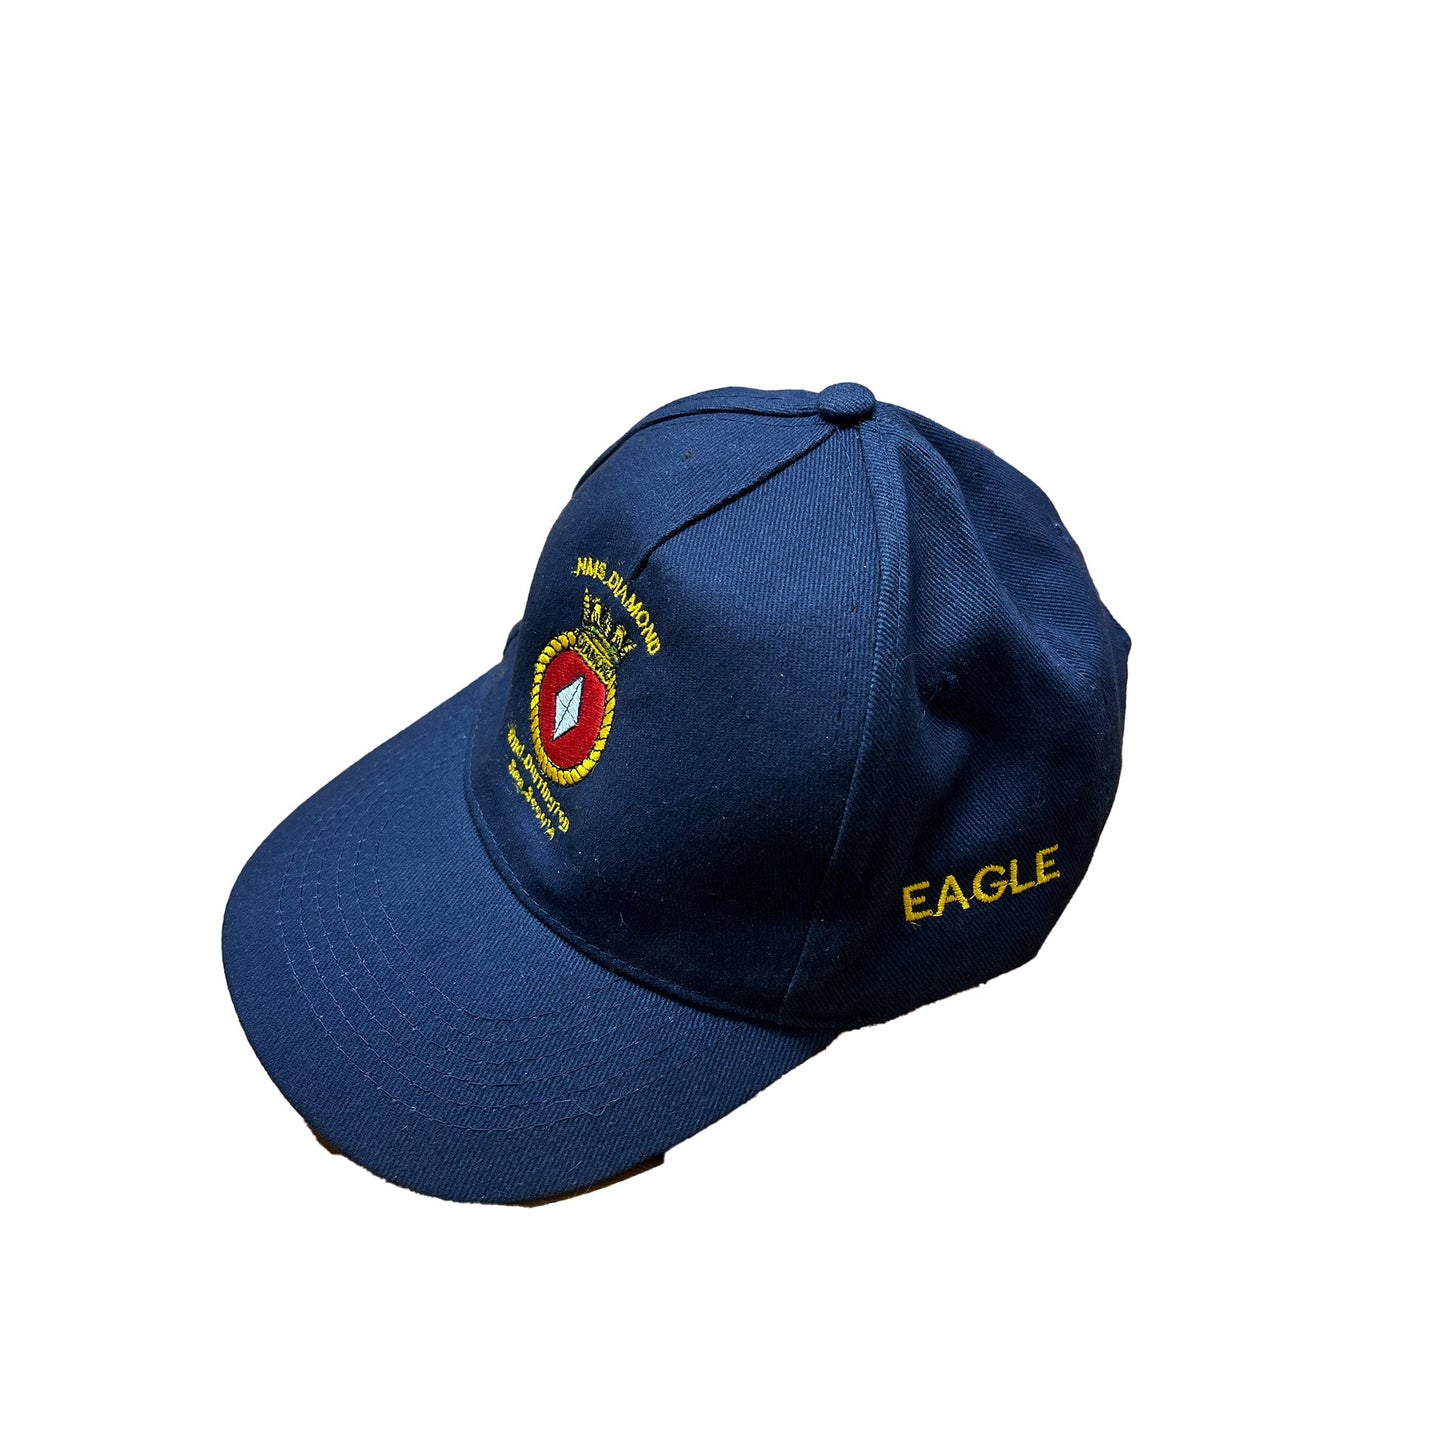 2nd Durrington Sea Scouts Embroidered Logo Cap 6-8 Years